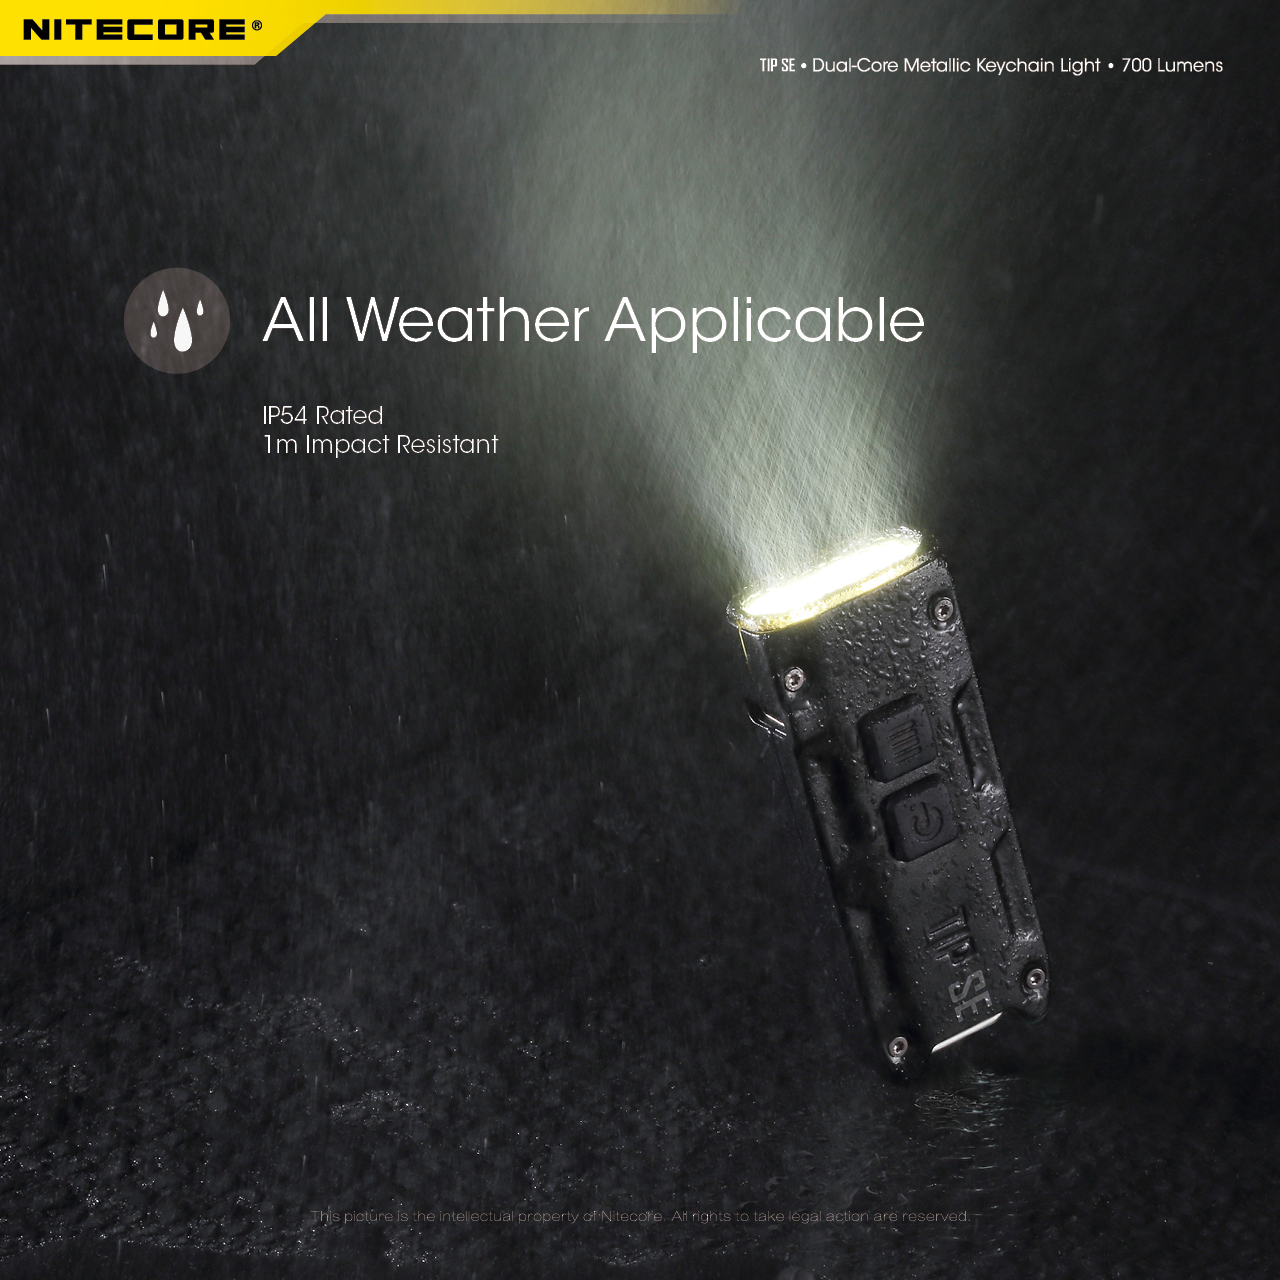 NITECORE-TIP-SE-700LM-P8-Dual-Light-LED-Keychain-Flashlight-Type-C-Rechargeable-QC-Every-Day-Carry-M-1976045-19